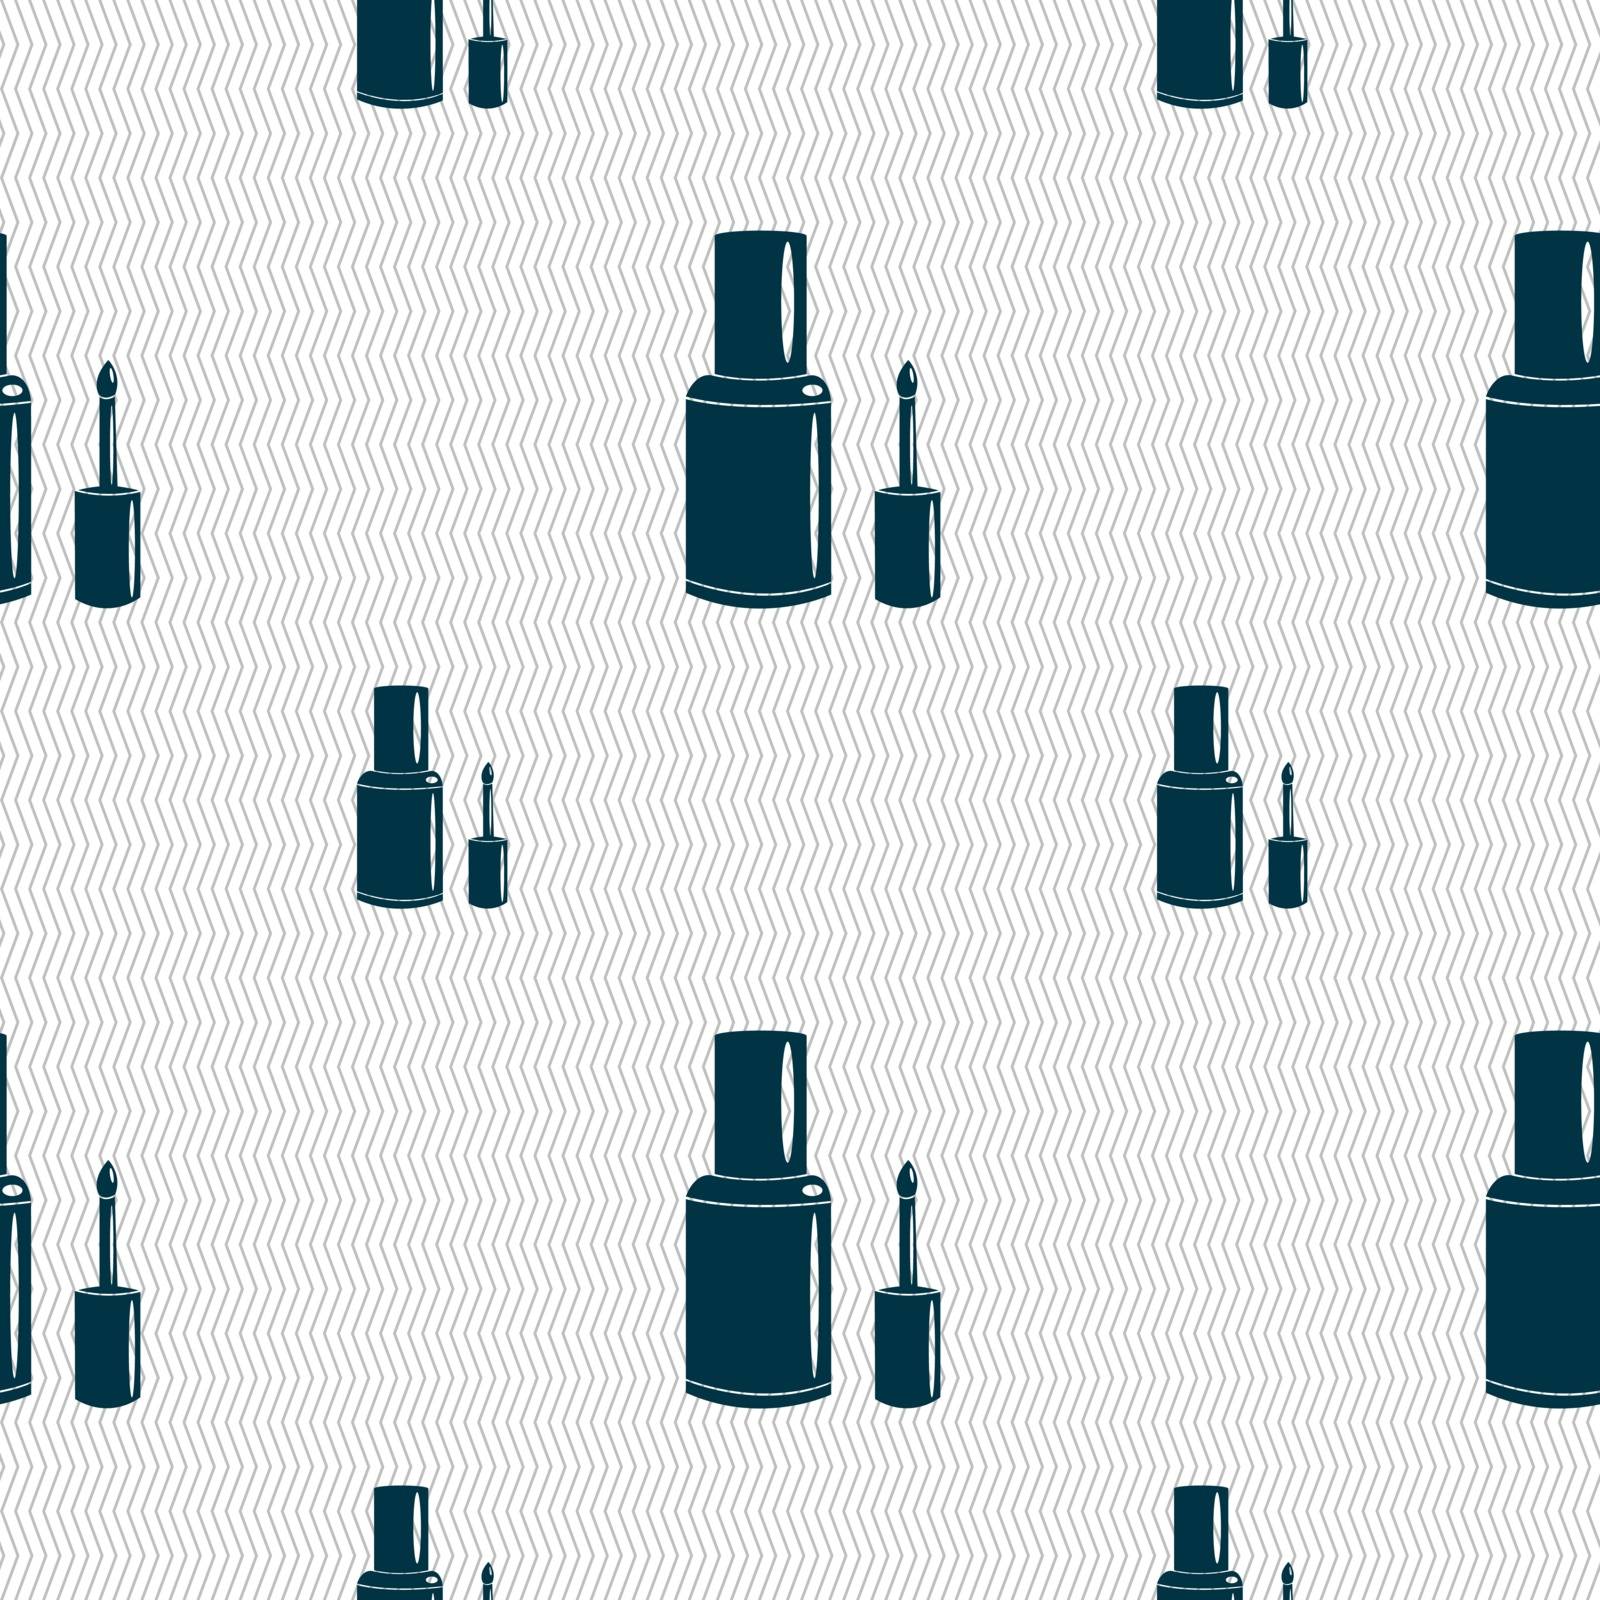 NAIL POLISH BOTTLE icon sign. Seamless pattern with geometric texture. Vector illustration